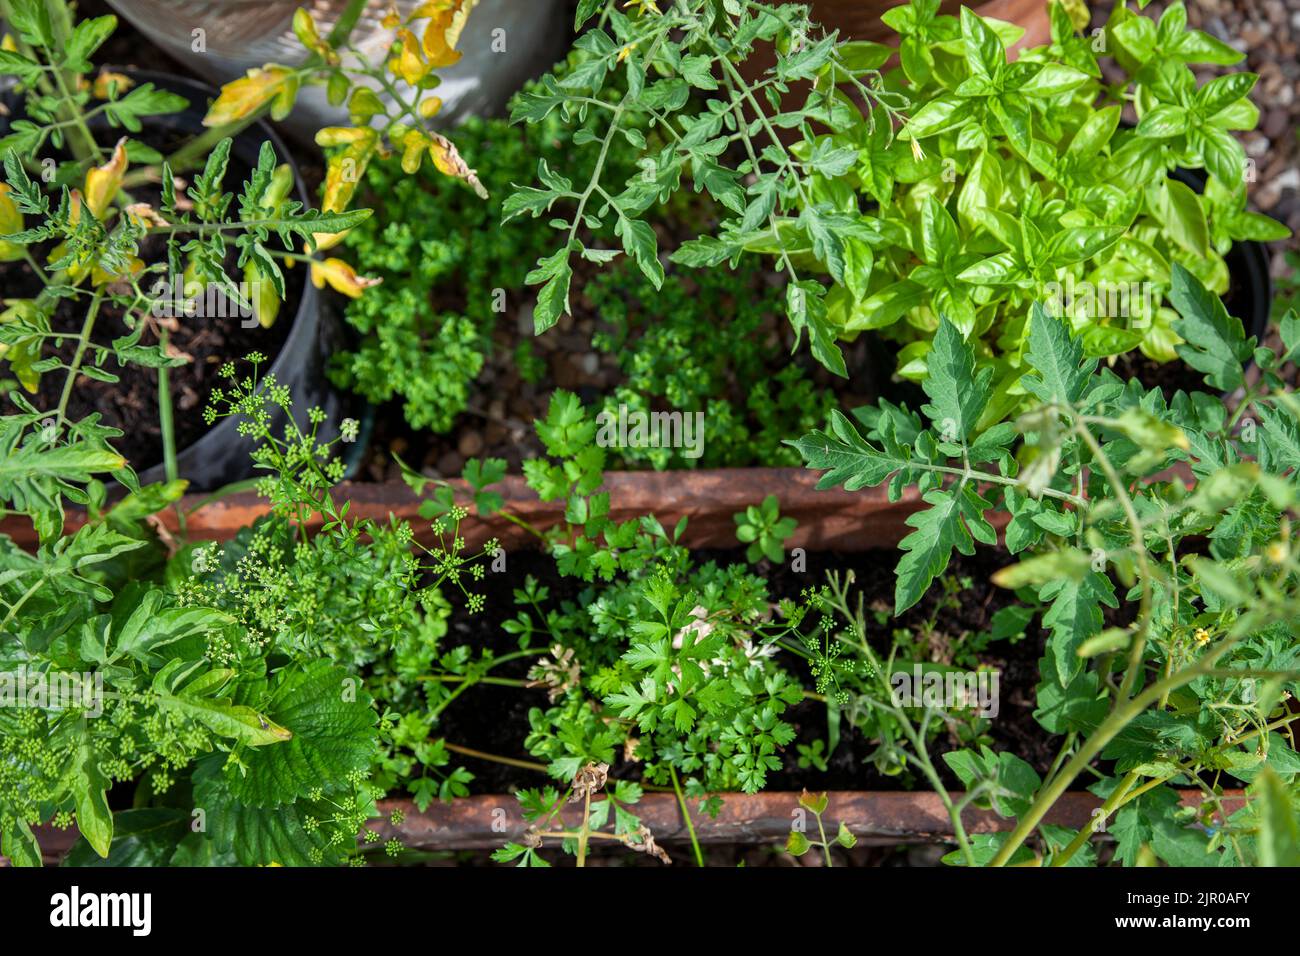 Pots of Herbs and Tomato foliage in Working Home Garden with Plants, Vegetables - London UK Stock Photo